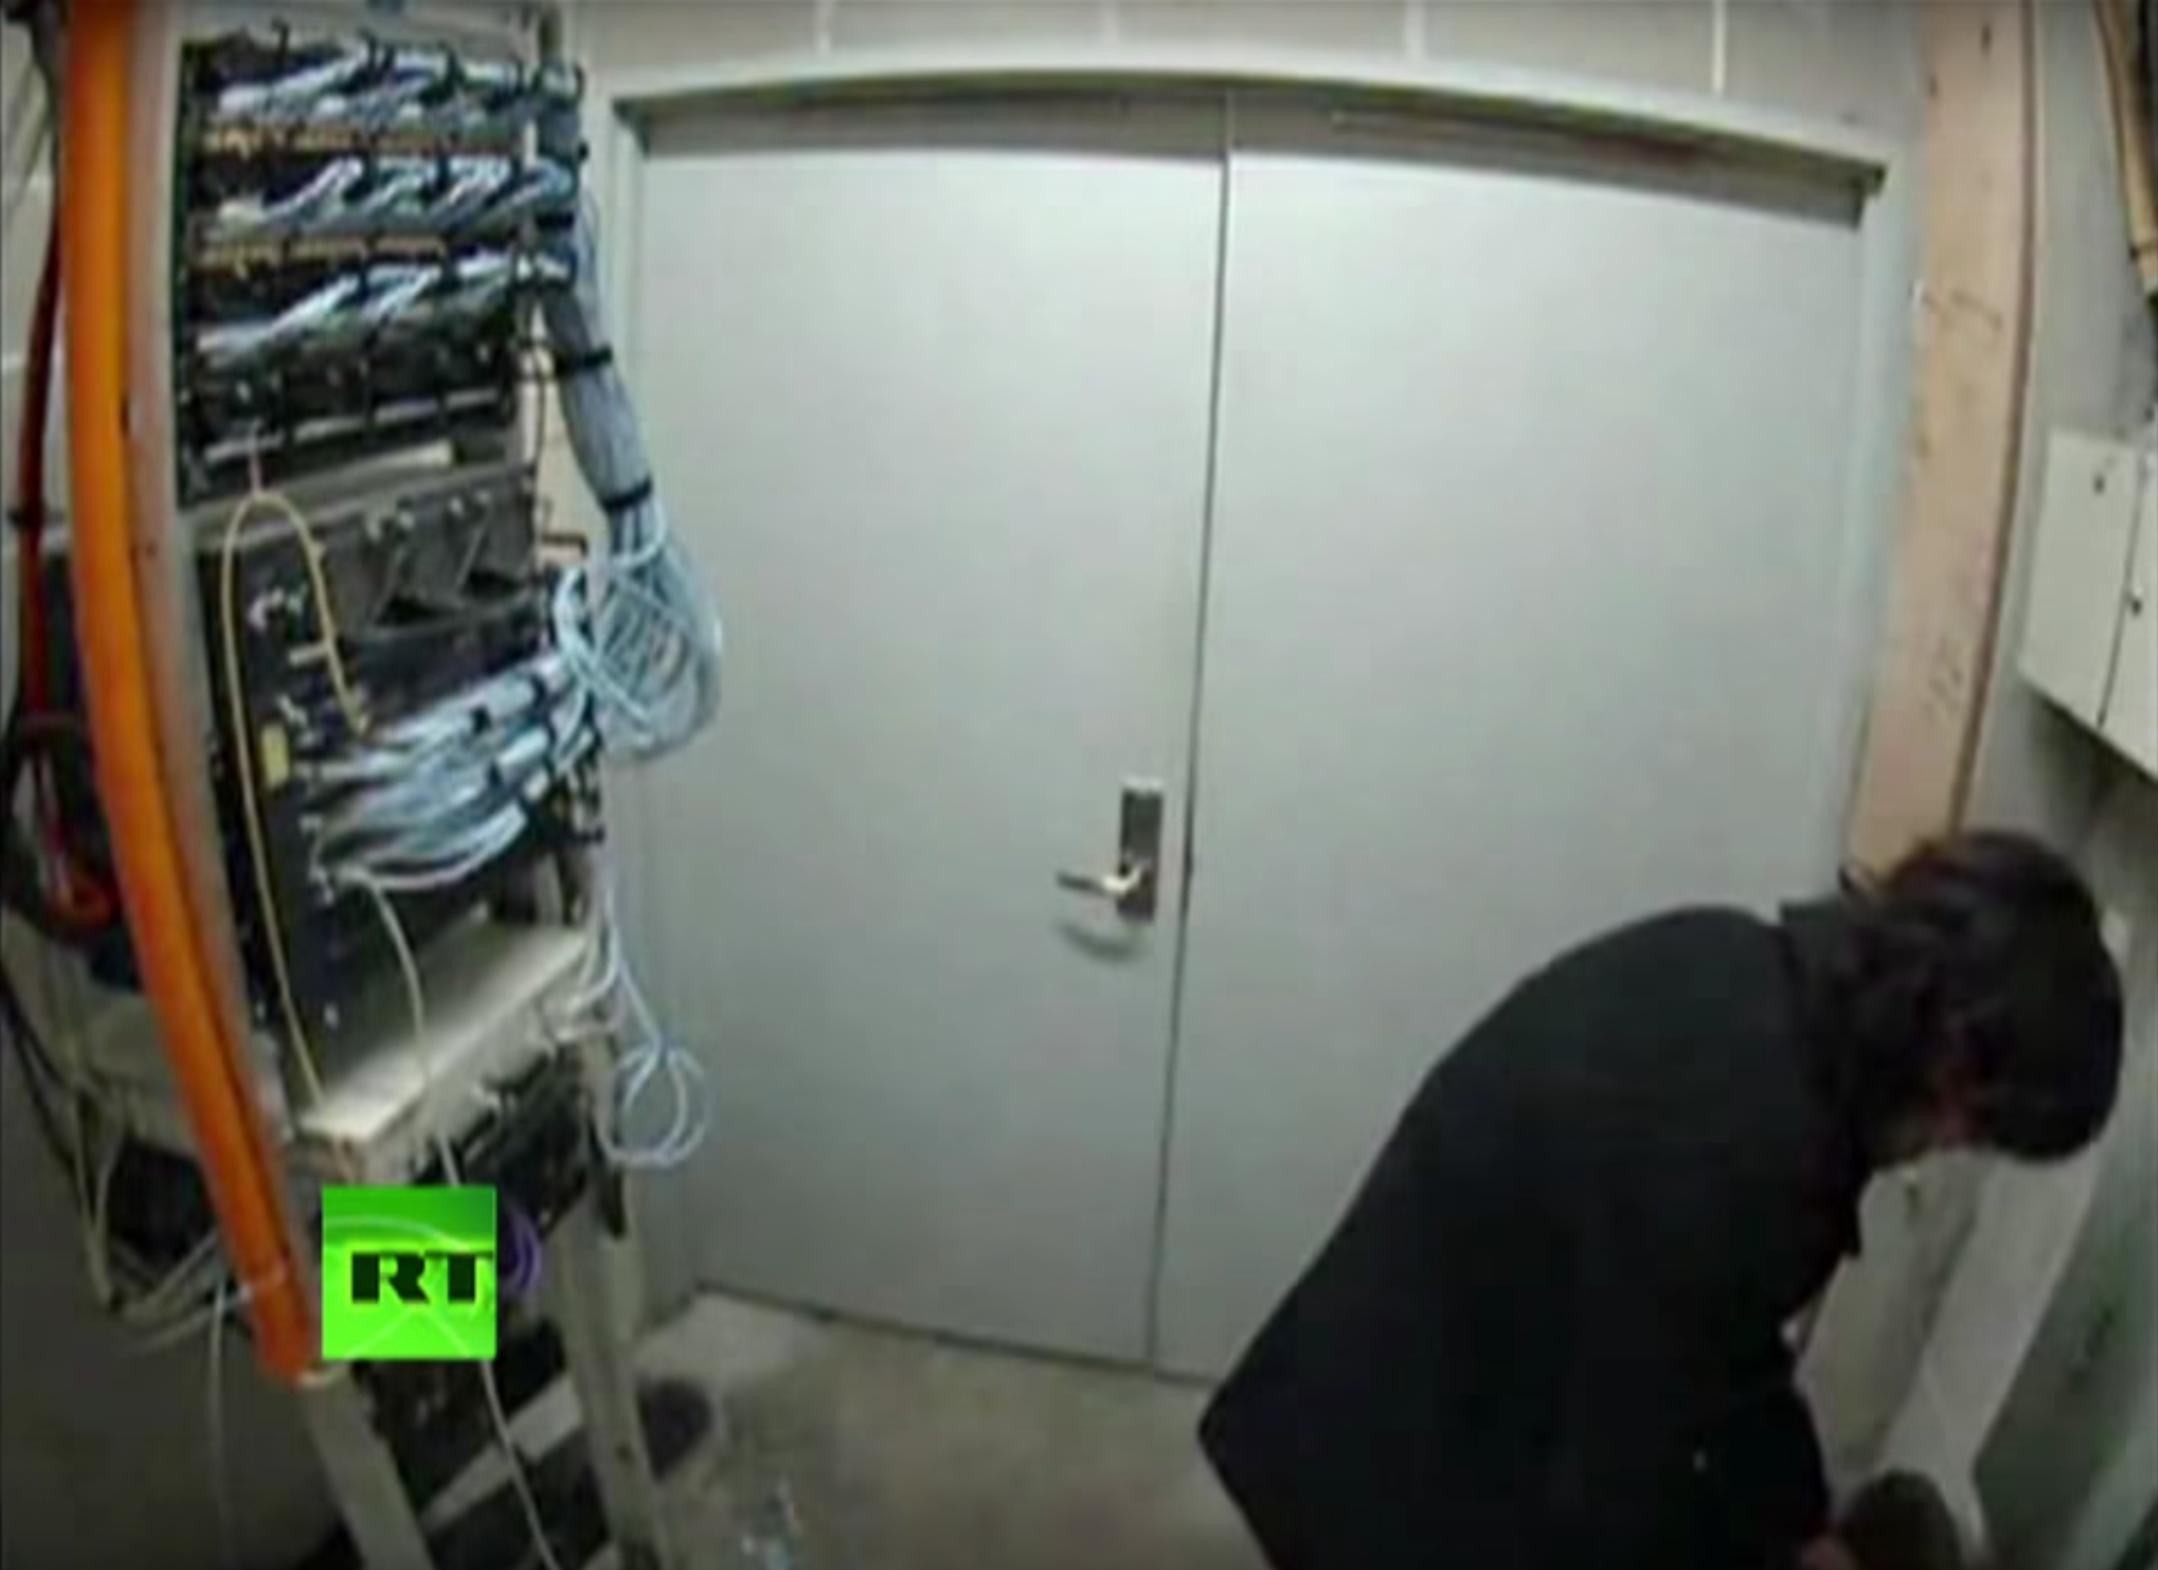 The first line of Swartz's Manifesto reads “Information is power. But like all power, there are those who want to keep it for themselves.” This is the FBI video evidence of Swartz inside the JSTOR server room.